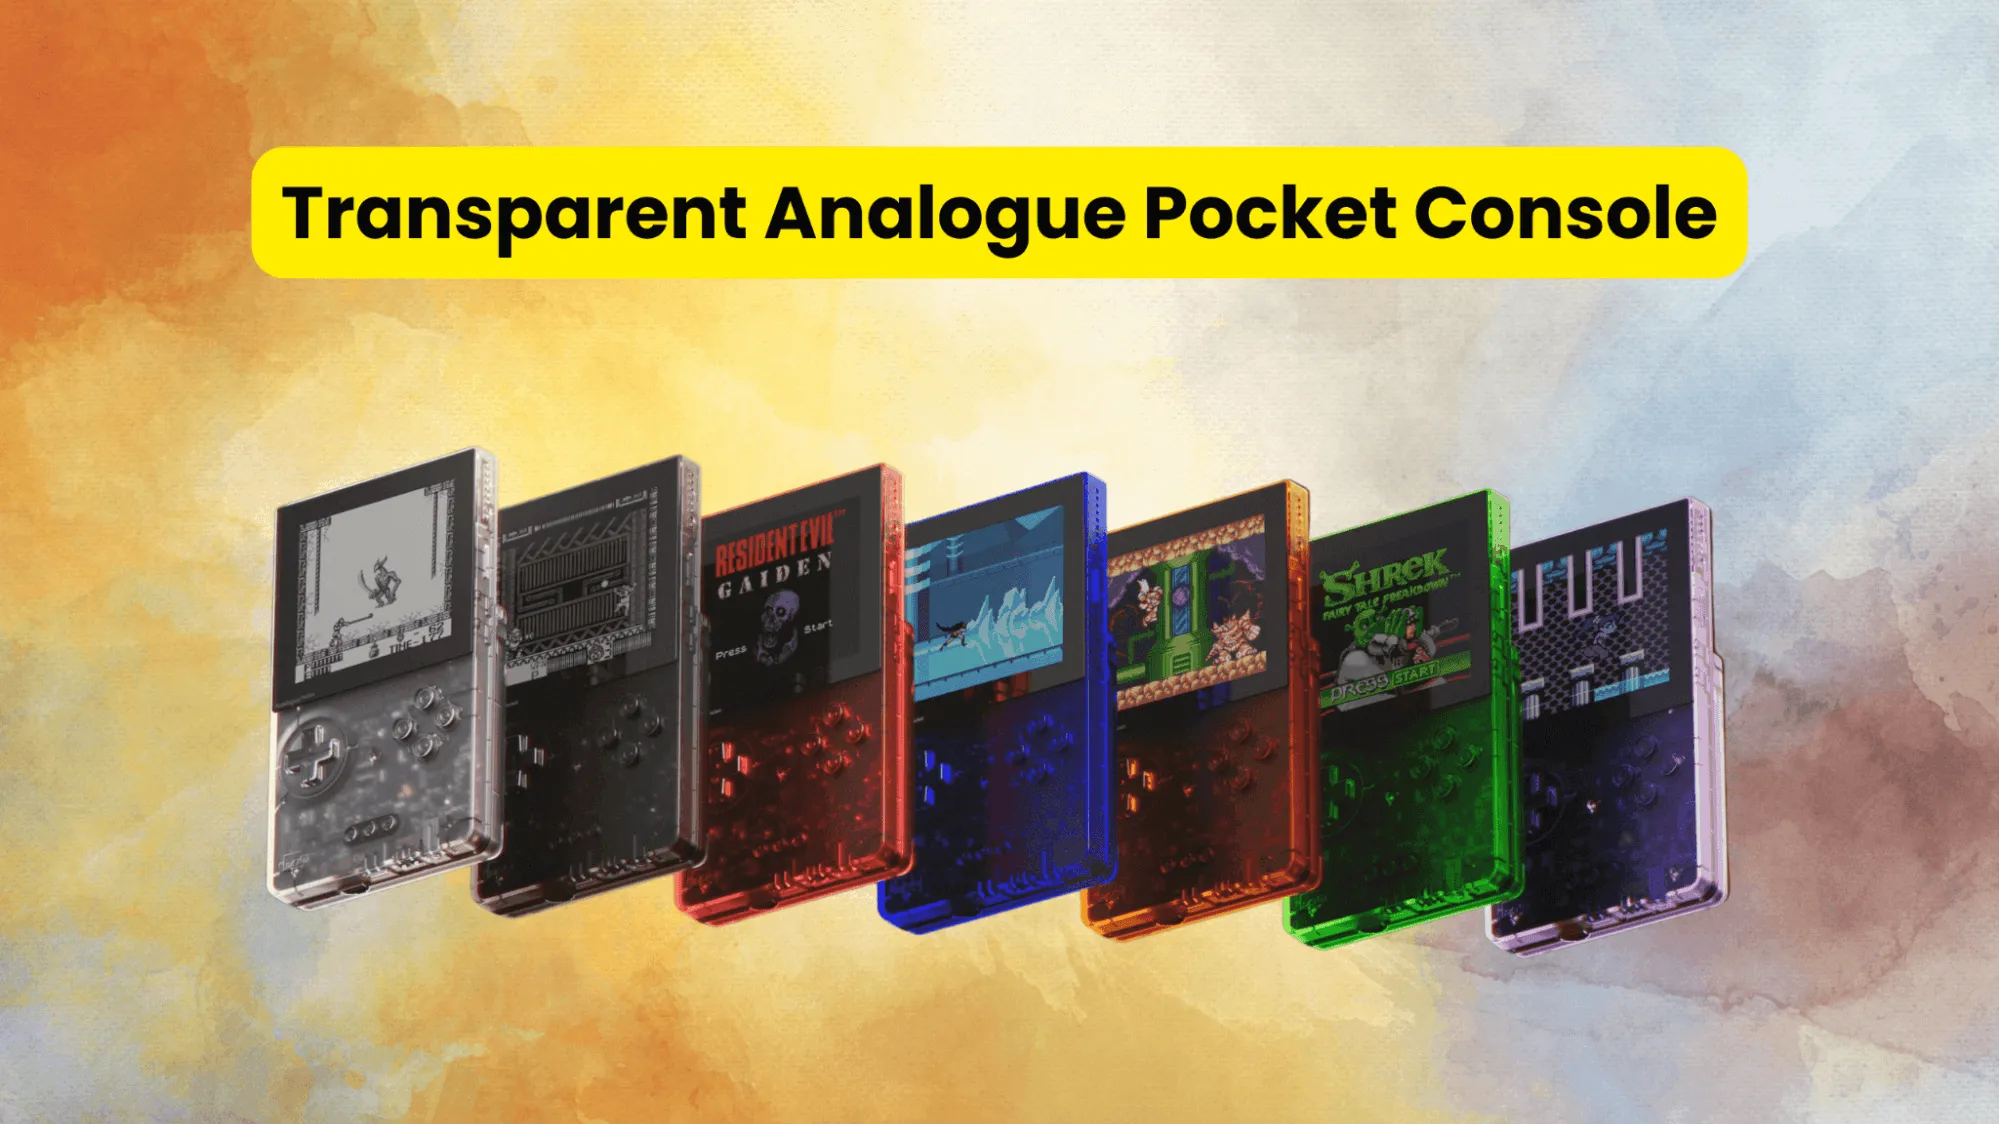 Transparent Analogue Pocket Console in 7 colors